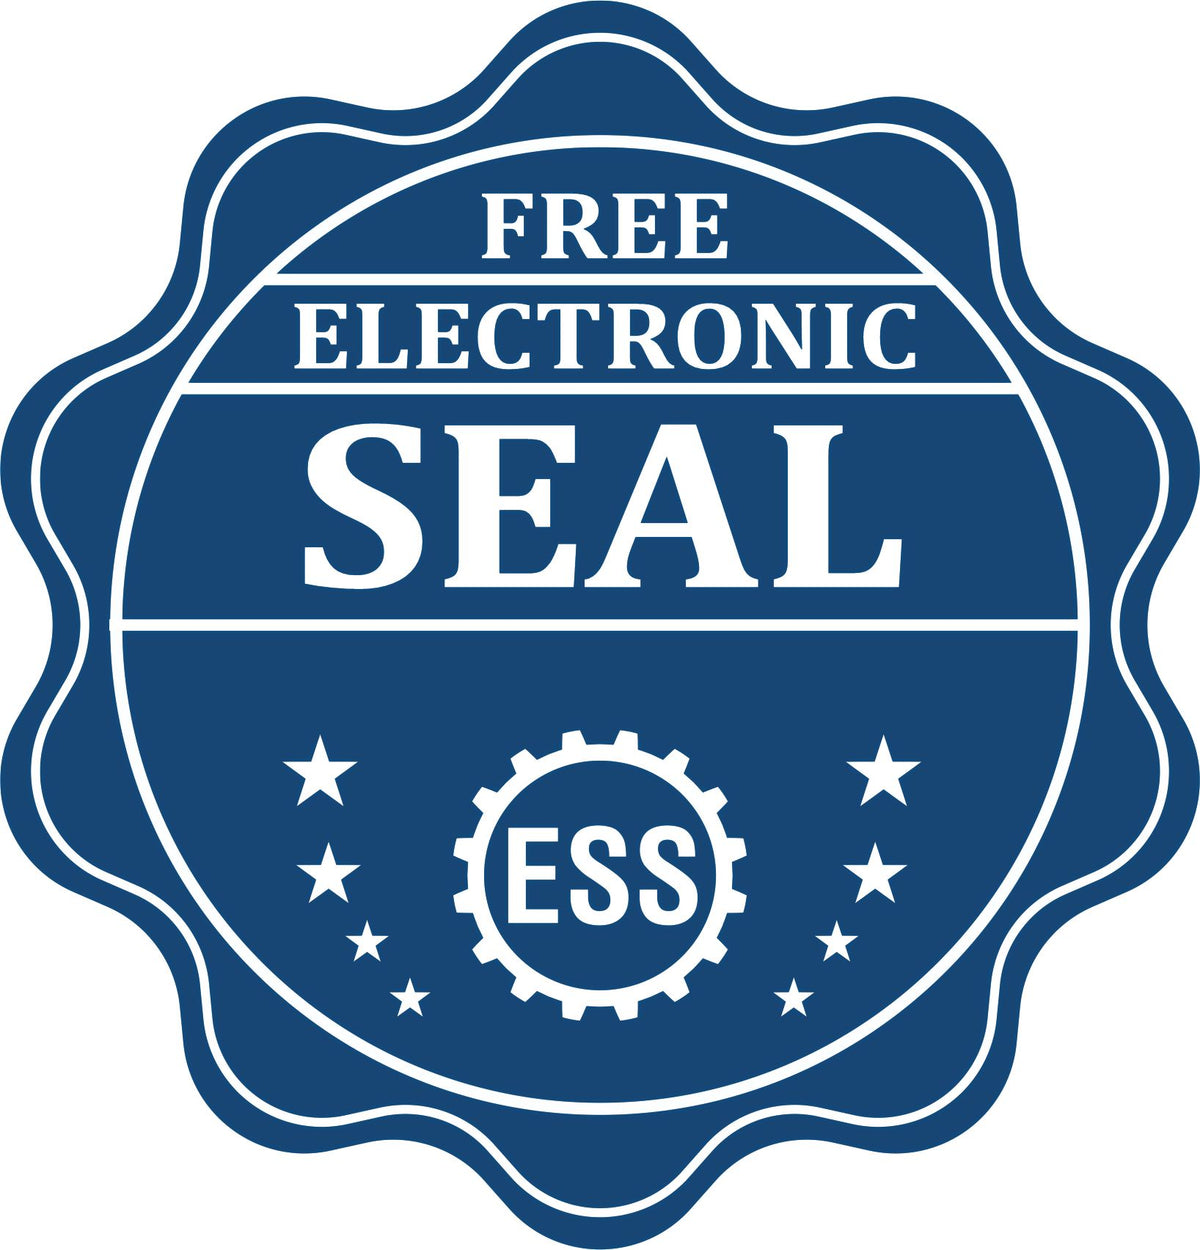 A badge showing a free electronic seal for the Gift Hawaii Landscape Architect Seal with stars and the ESS gear on the emblem.